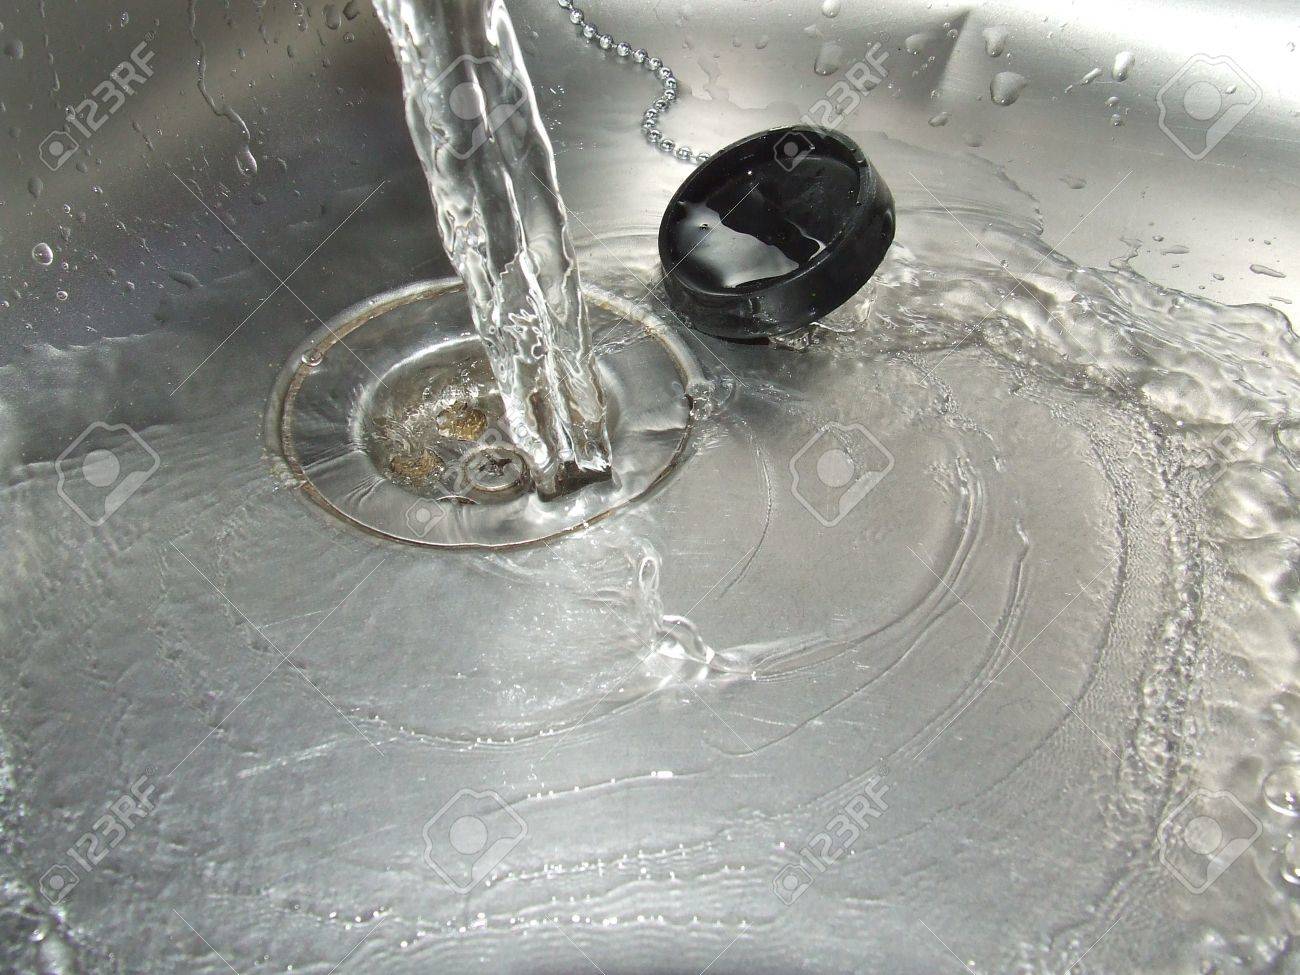 4426408-water-poured-down-the-drain-symbolic-of-either-flow-or-wastage.jpg